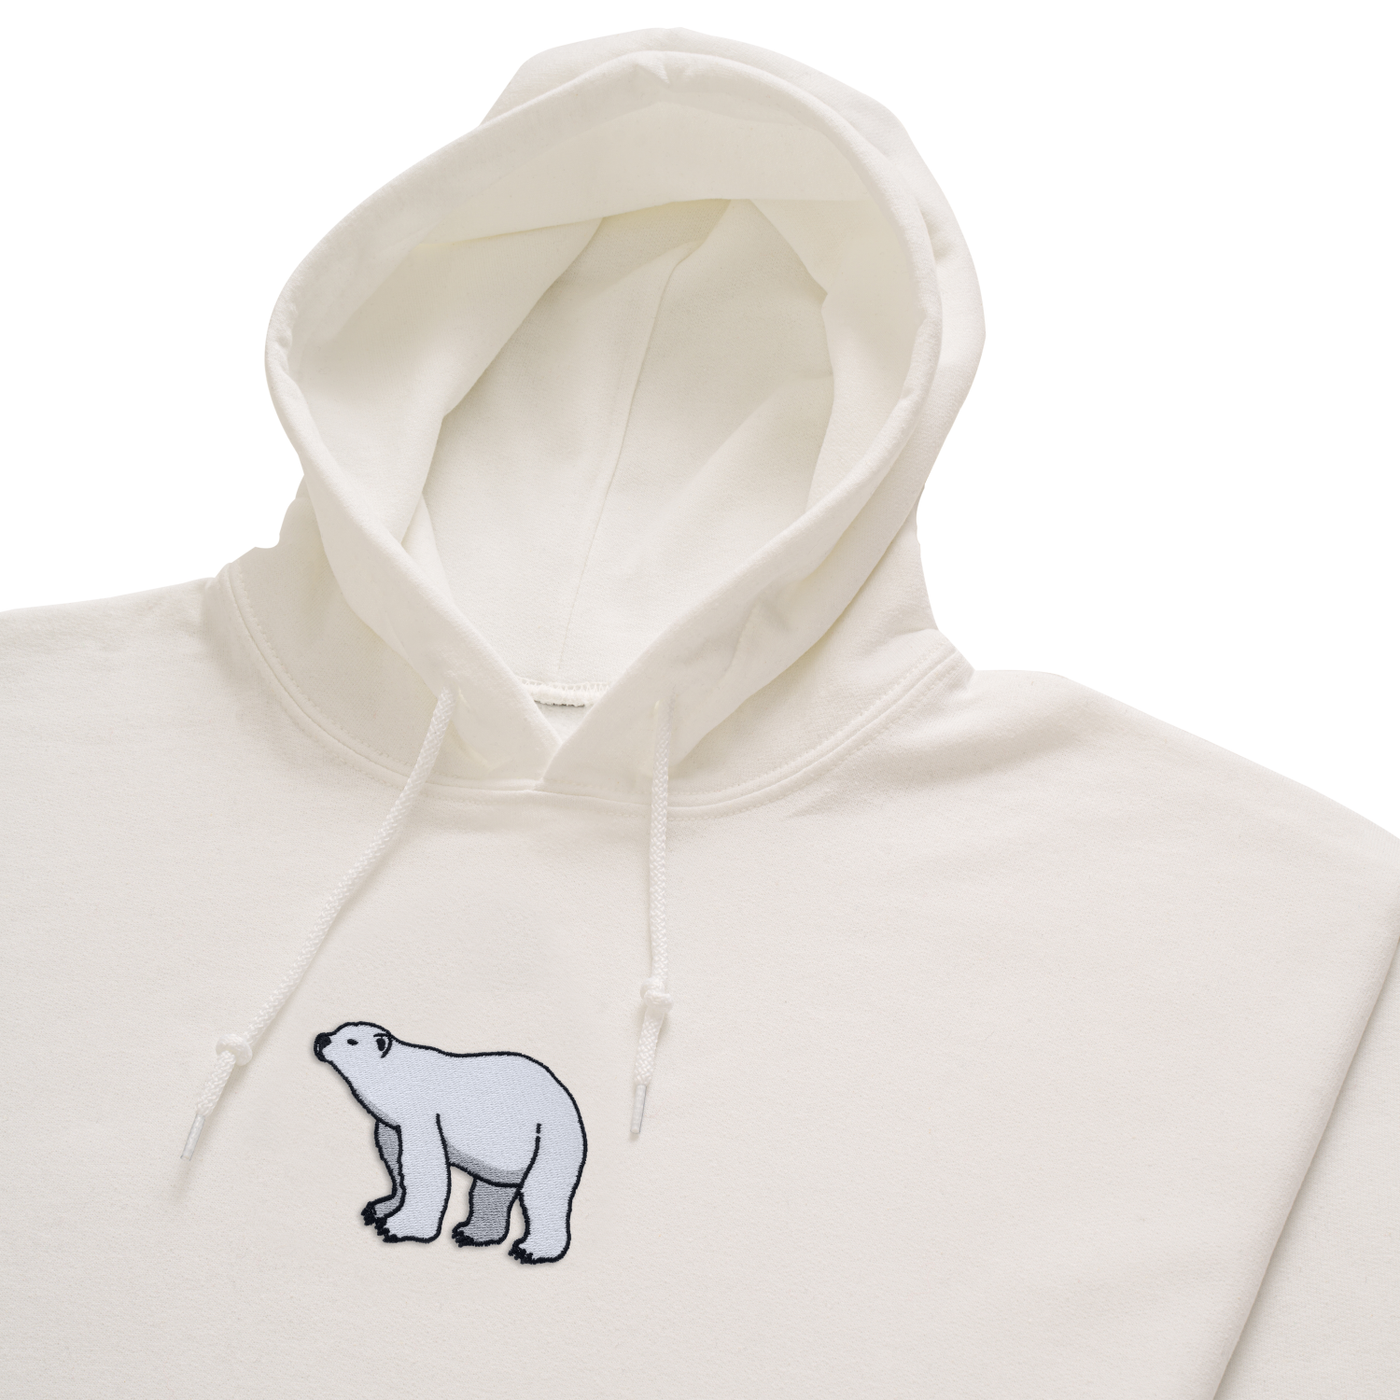 Bobby's Planet Men's Embroidered Polar Bear Hoodie from Arctic Polar Animals Collection in White Color#color_white